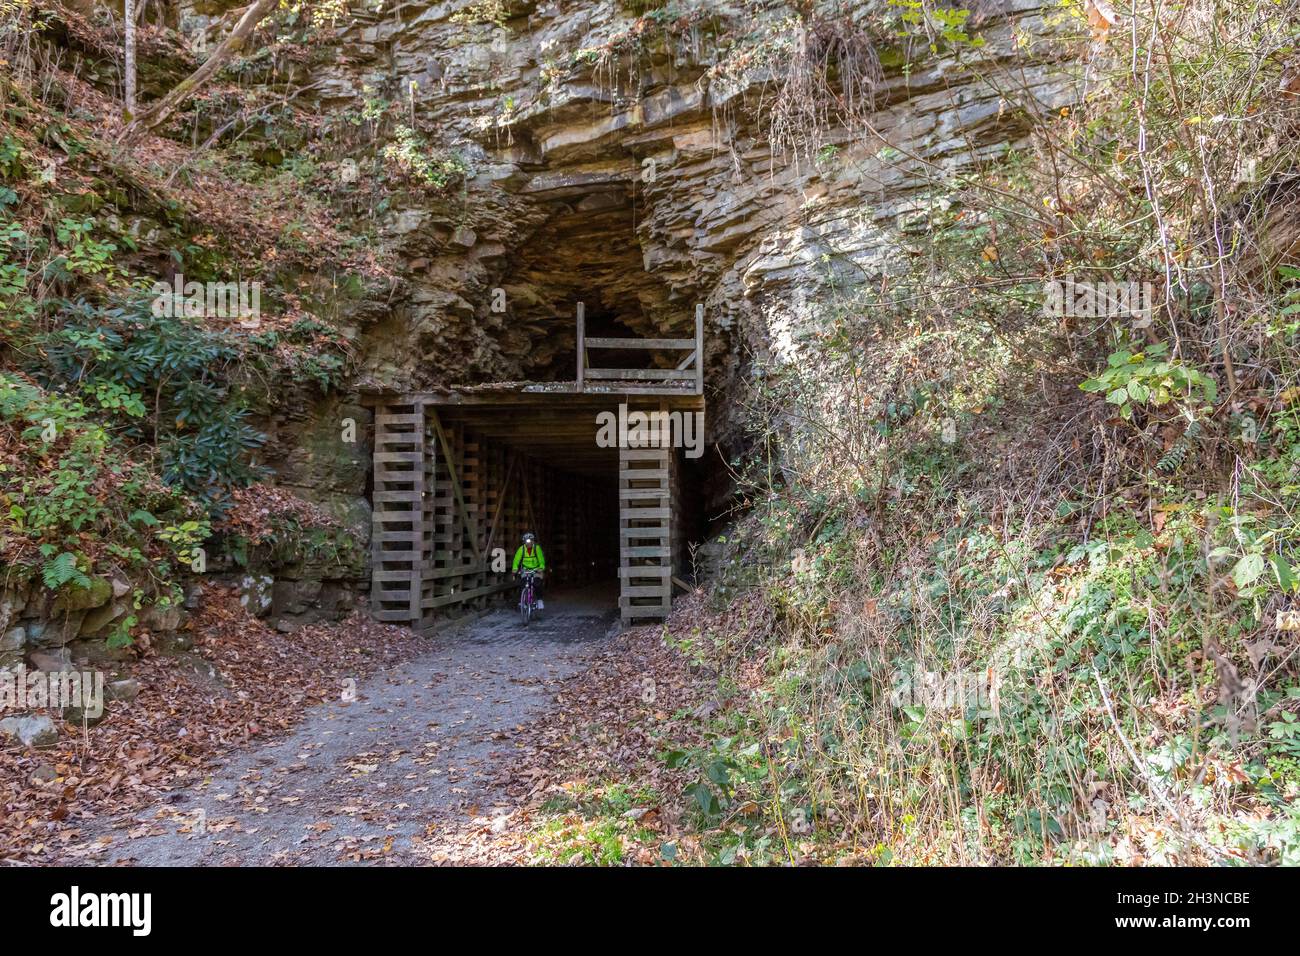 Martinton, West Virginia - John West, 75, rides out of the Droop Mountain Tunnel on the Greenbrier River Trail. The 78-mile rail trail runs along the Stock Photo